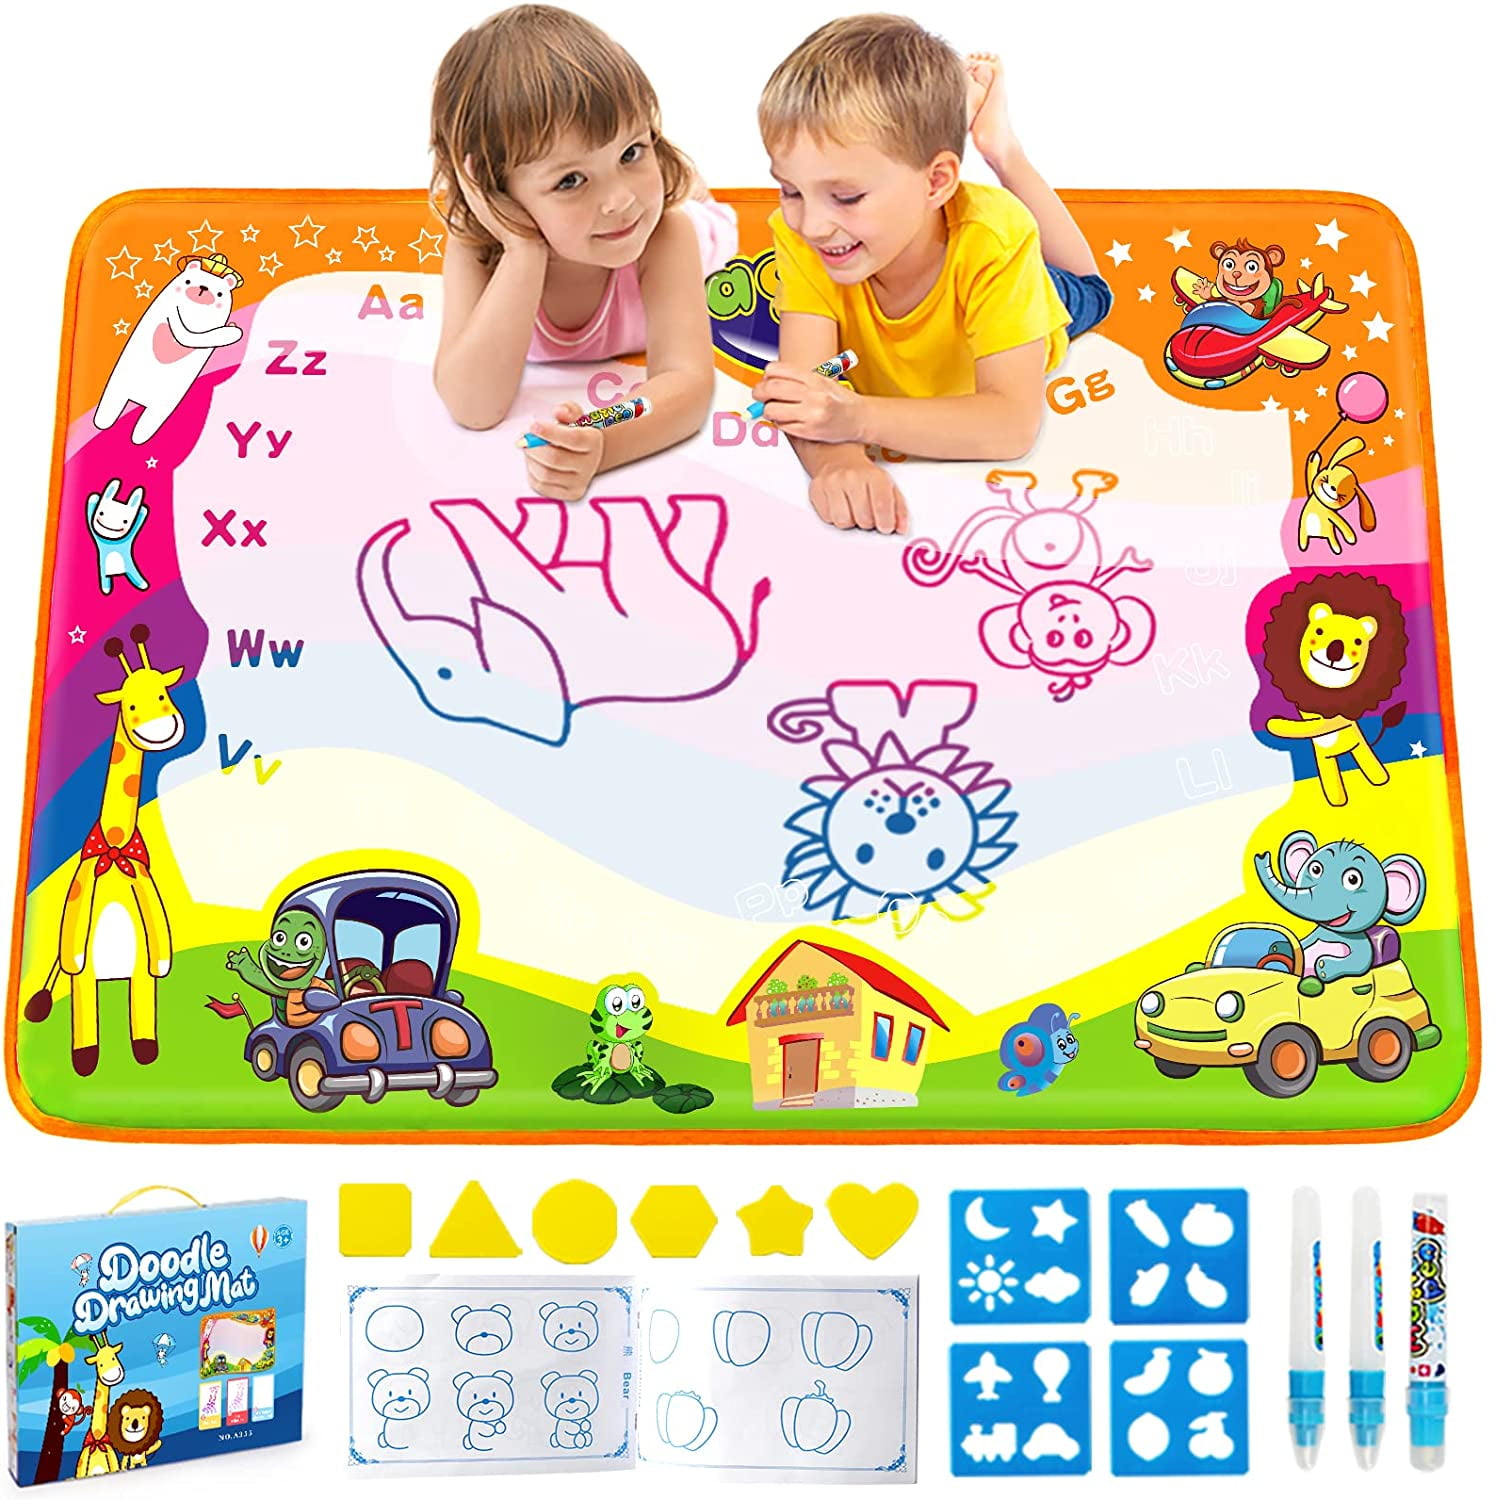 LIBWYS Water Doodle Mat Water Aqua Drawing Mat Large 120 x 90cm Mess-free Water Painting Mat Kids Learning Toys